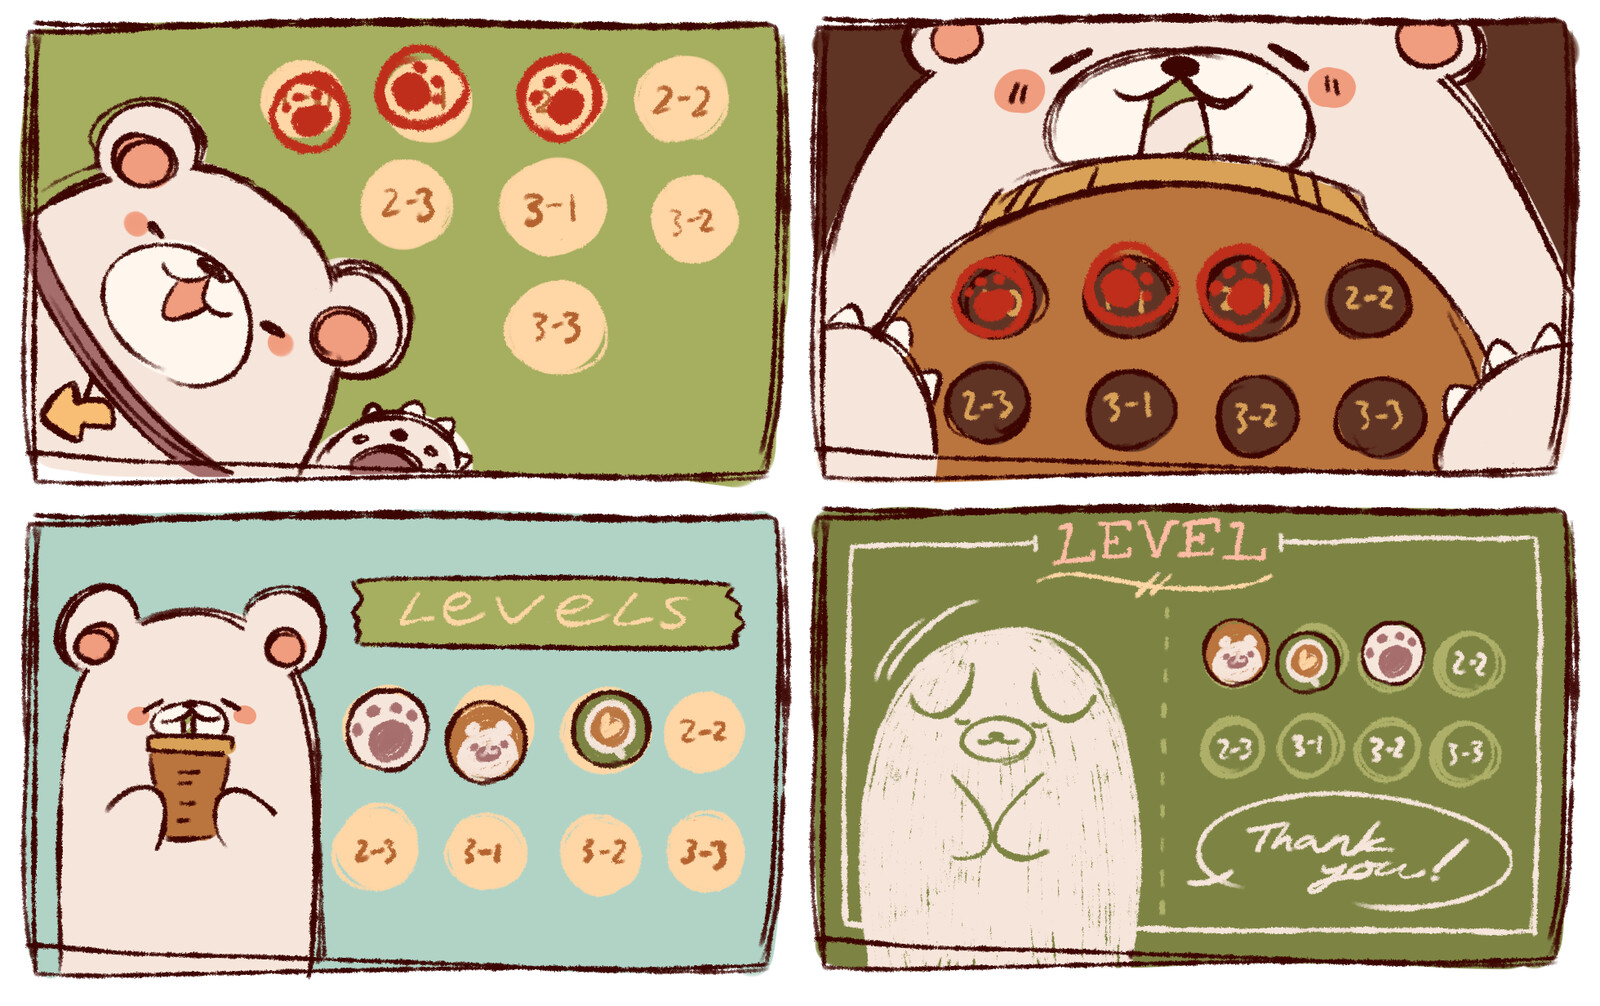 Flat view of the level selection screen. Inspired by point rewards cards from boba tea shops.